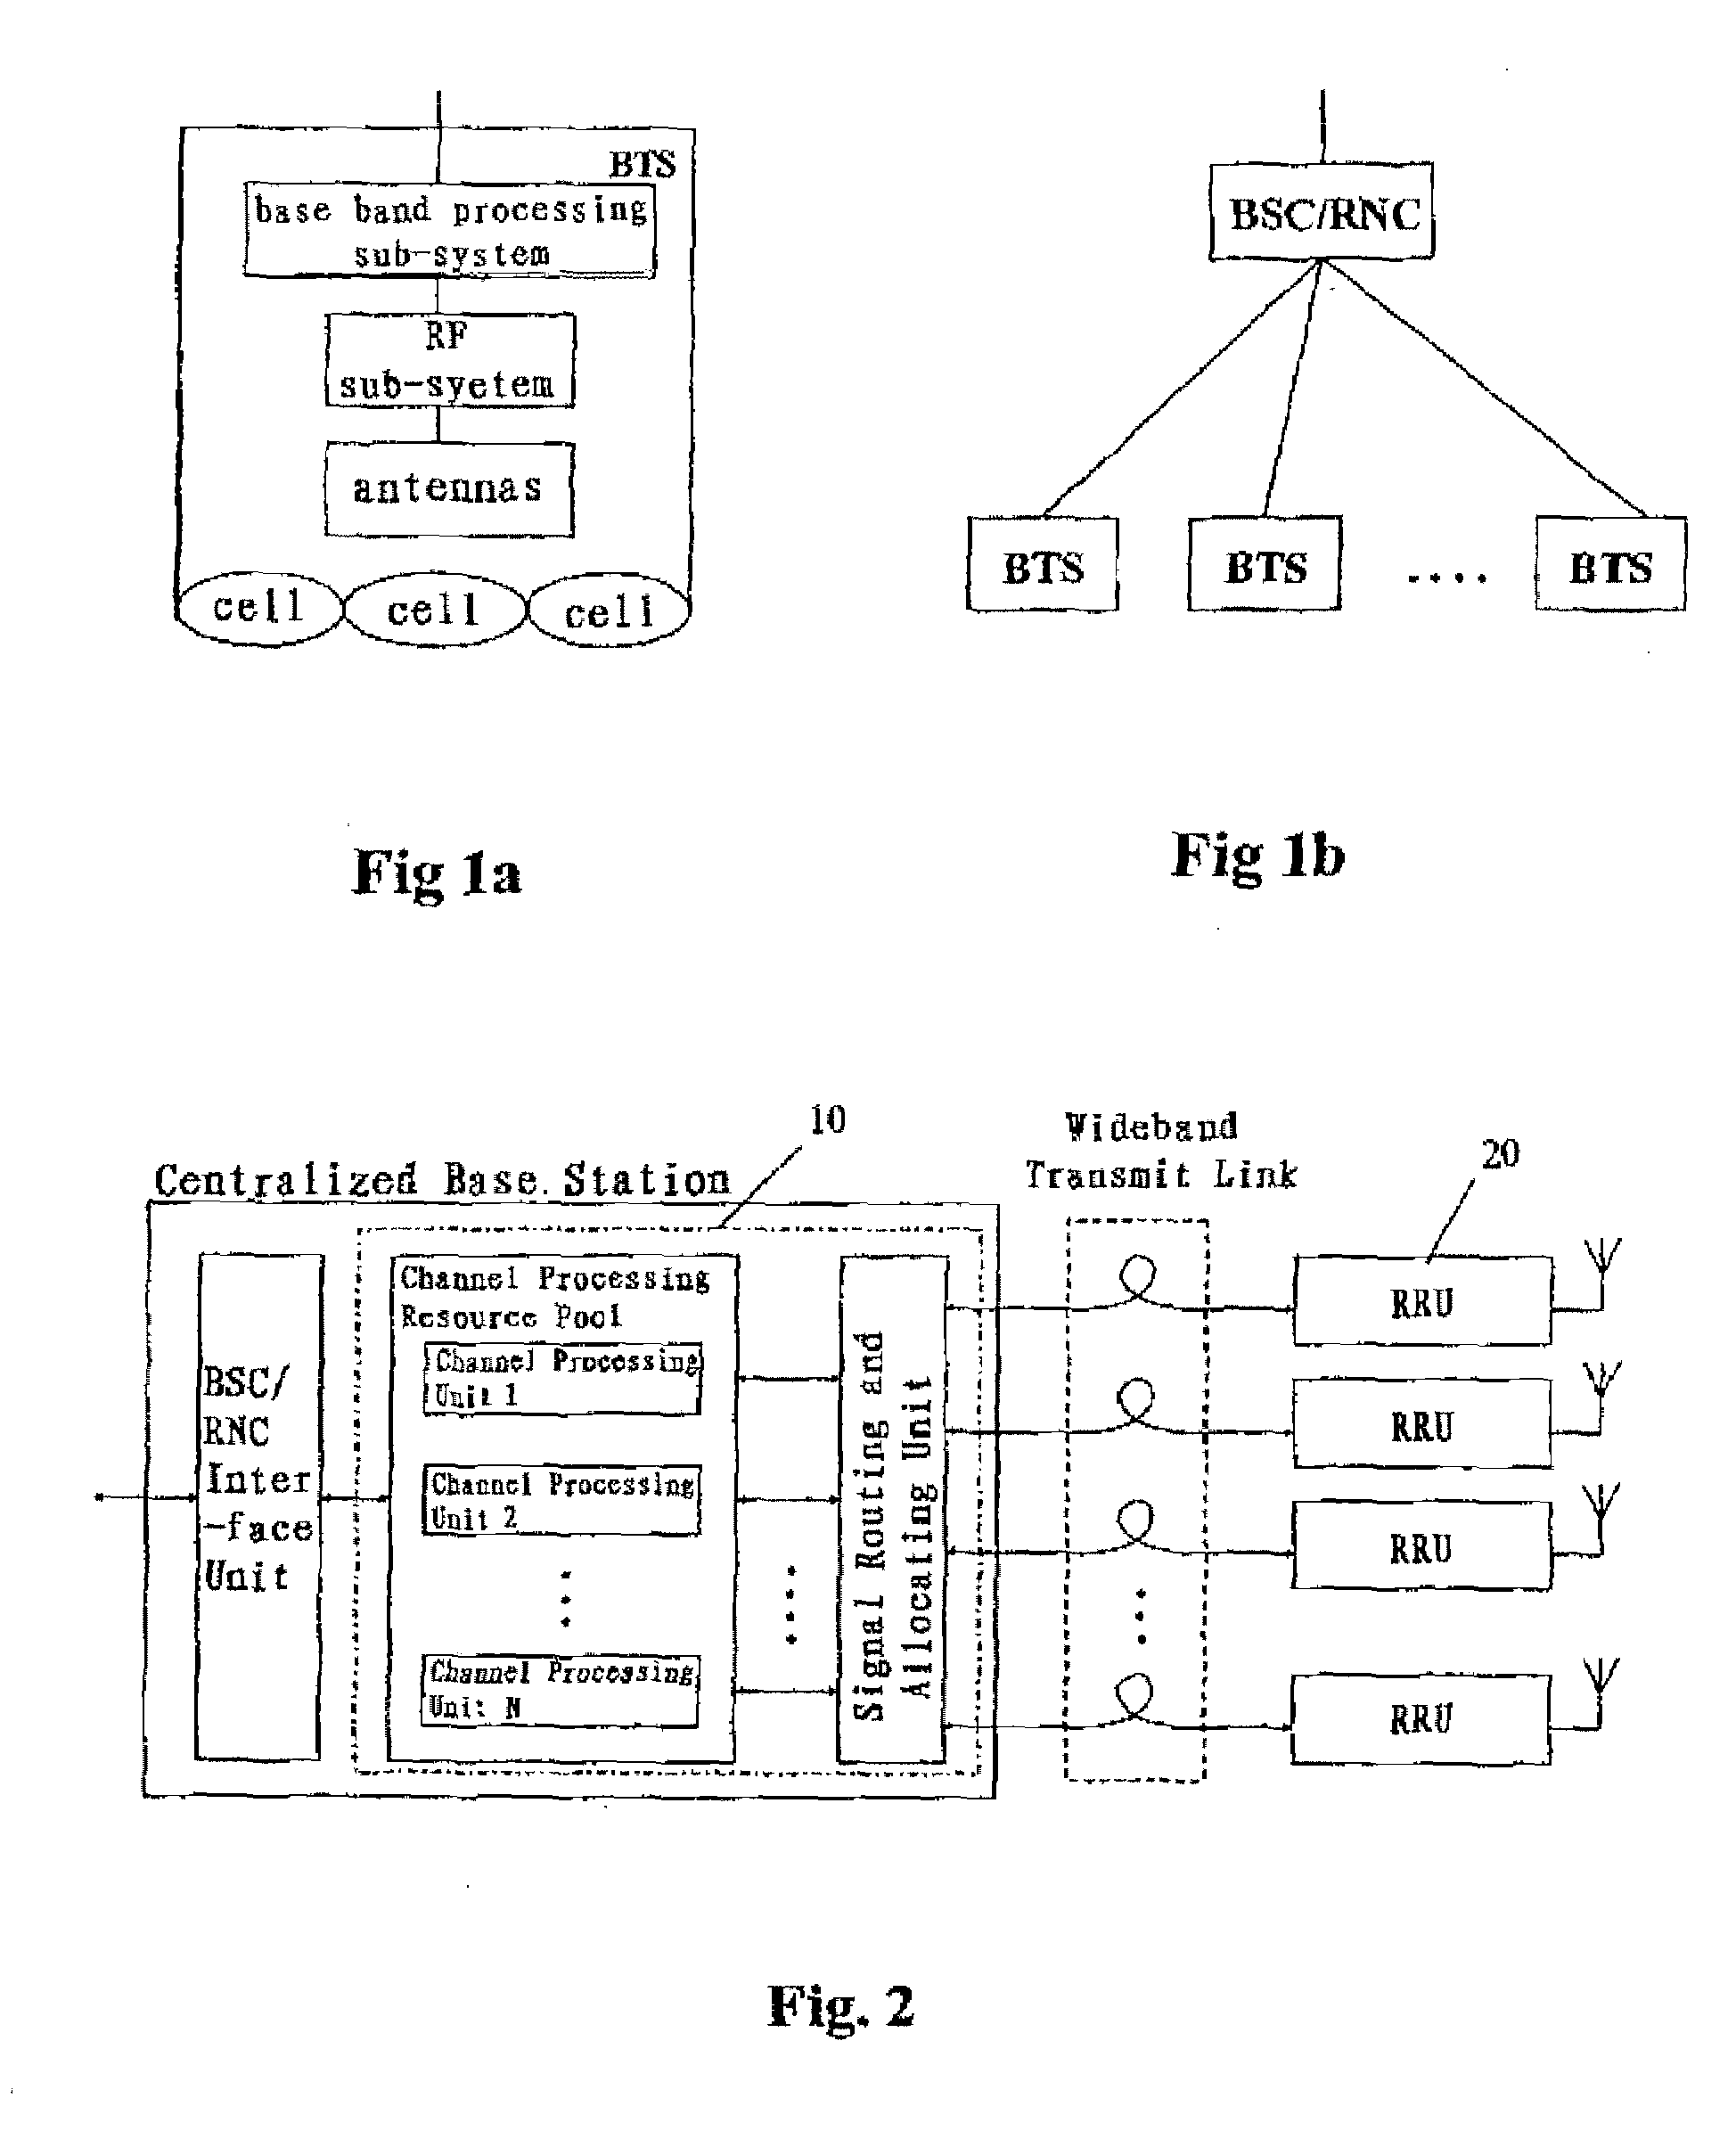 Method for Dynamic Resource Allocation in Centrailized Base Stations